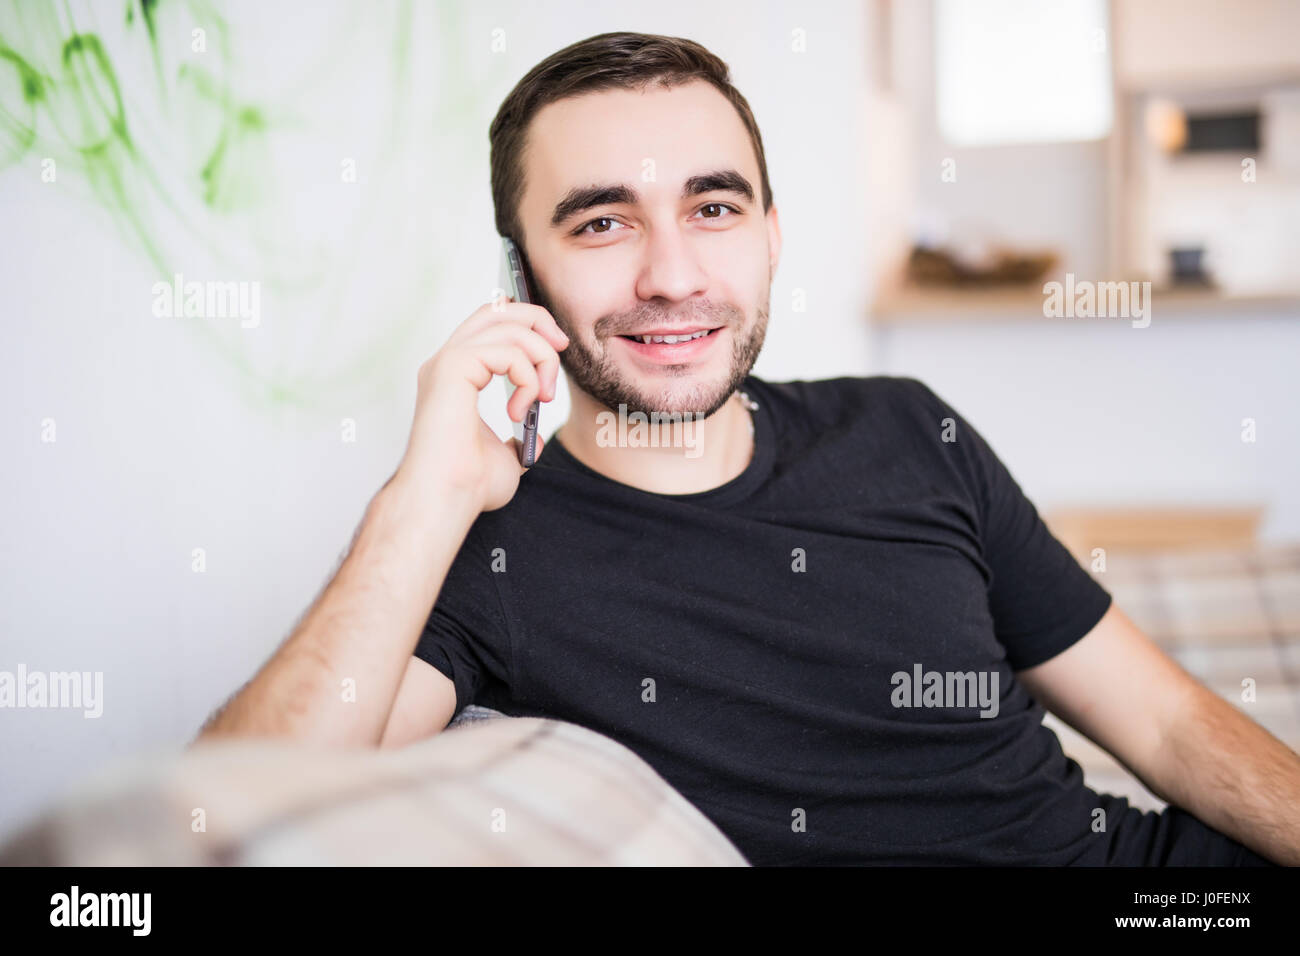 Young man on the cellphone sitting in the living room Stock Photo